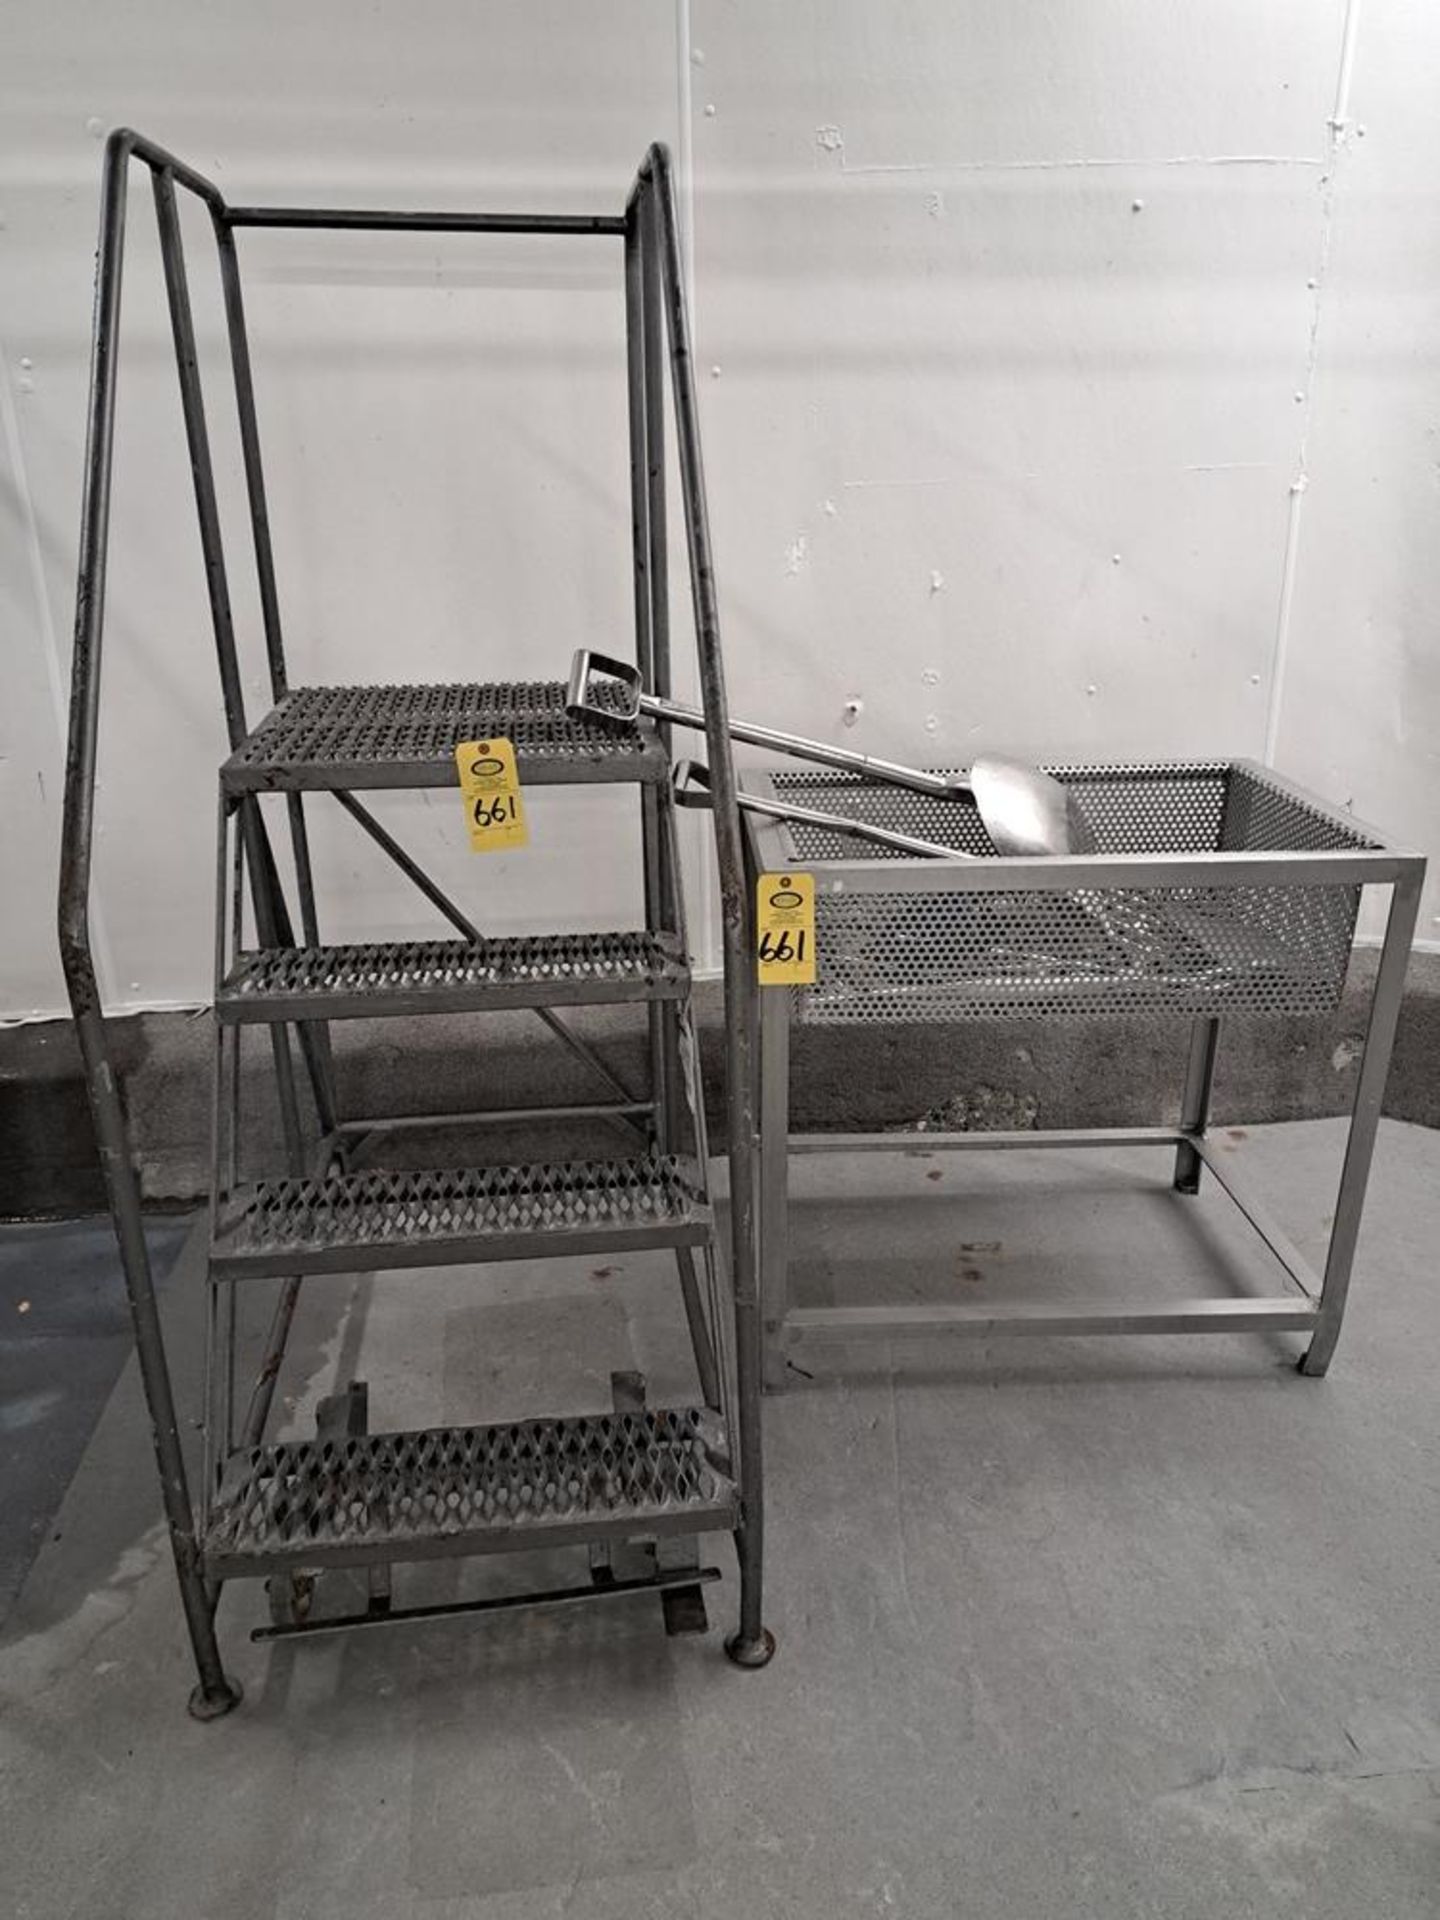 Lot Stainless Steel Parts Rack, 2' X 3', (1) Portable Ladder, 2' W X 4' L : Required Loading Fee $